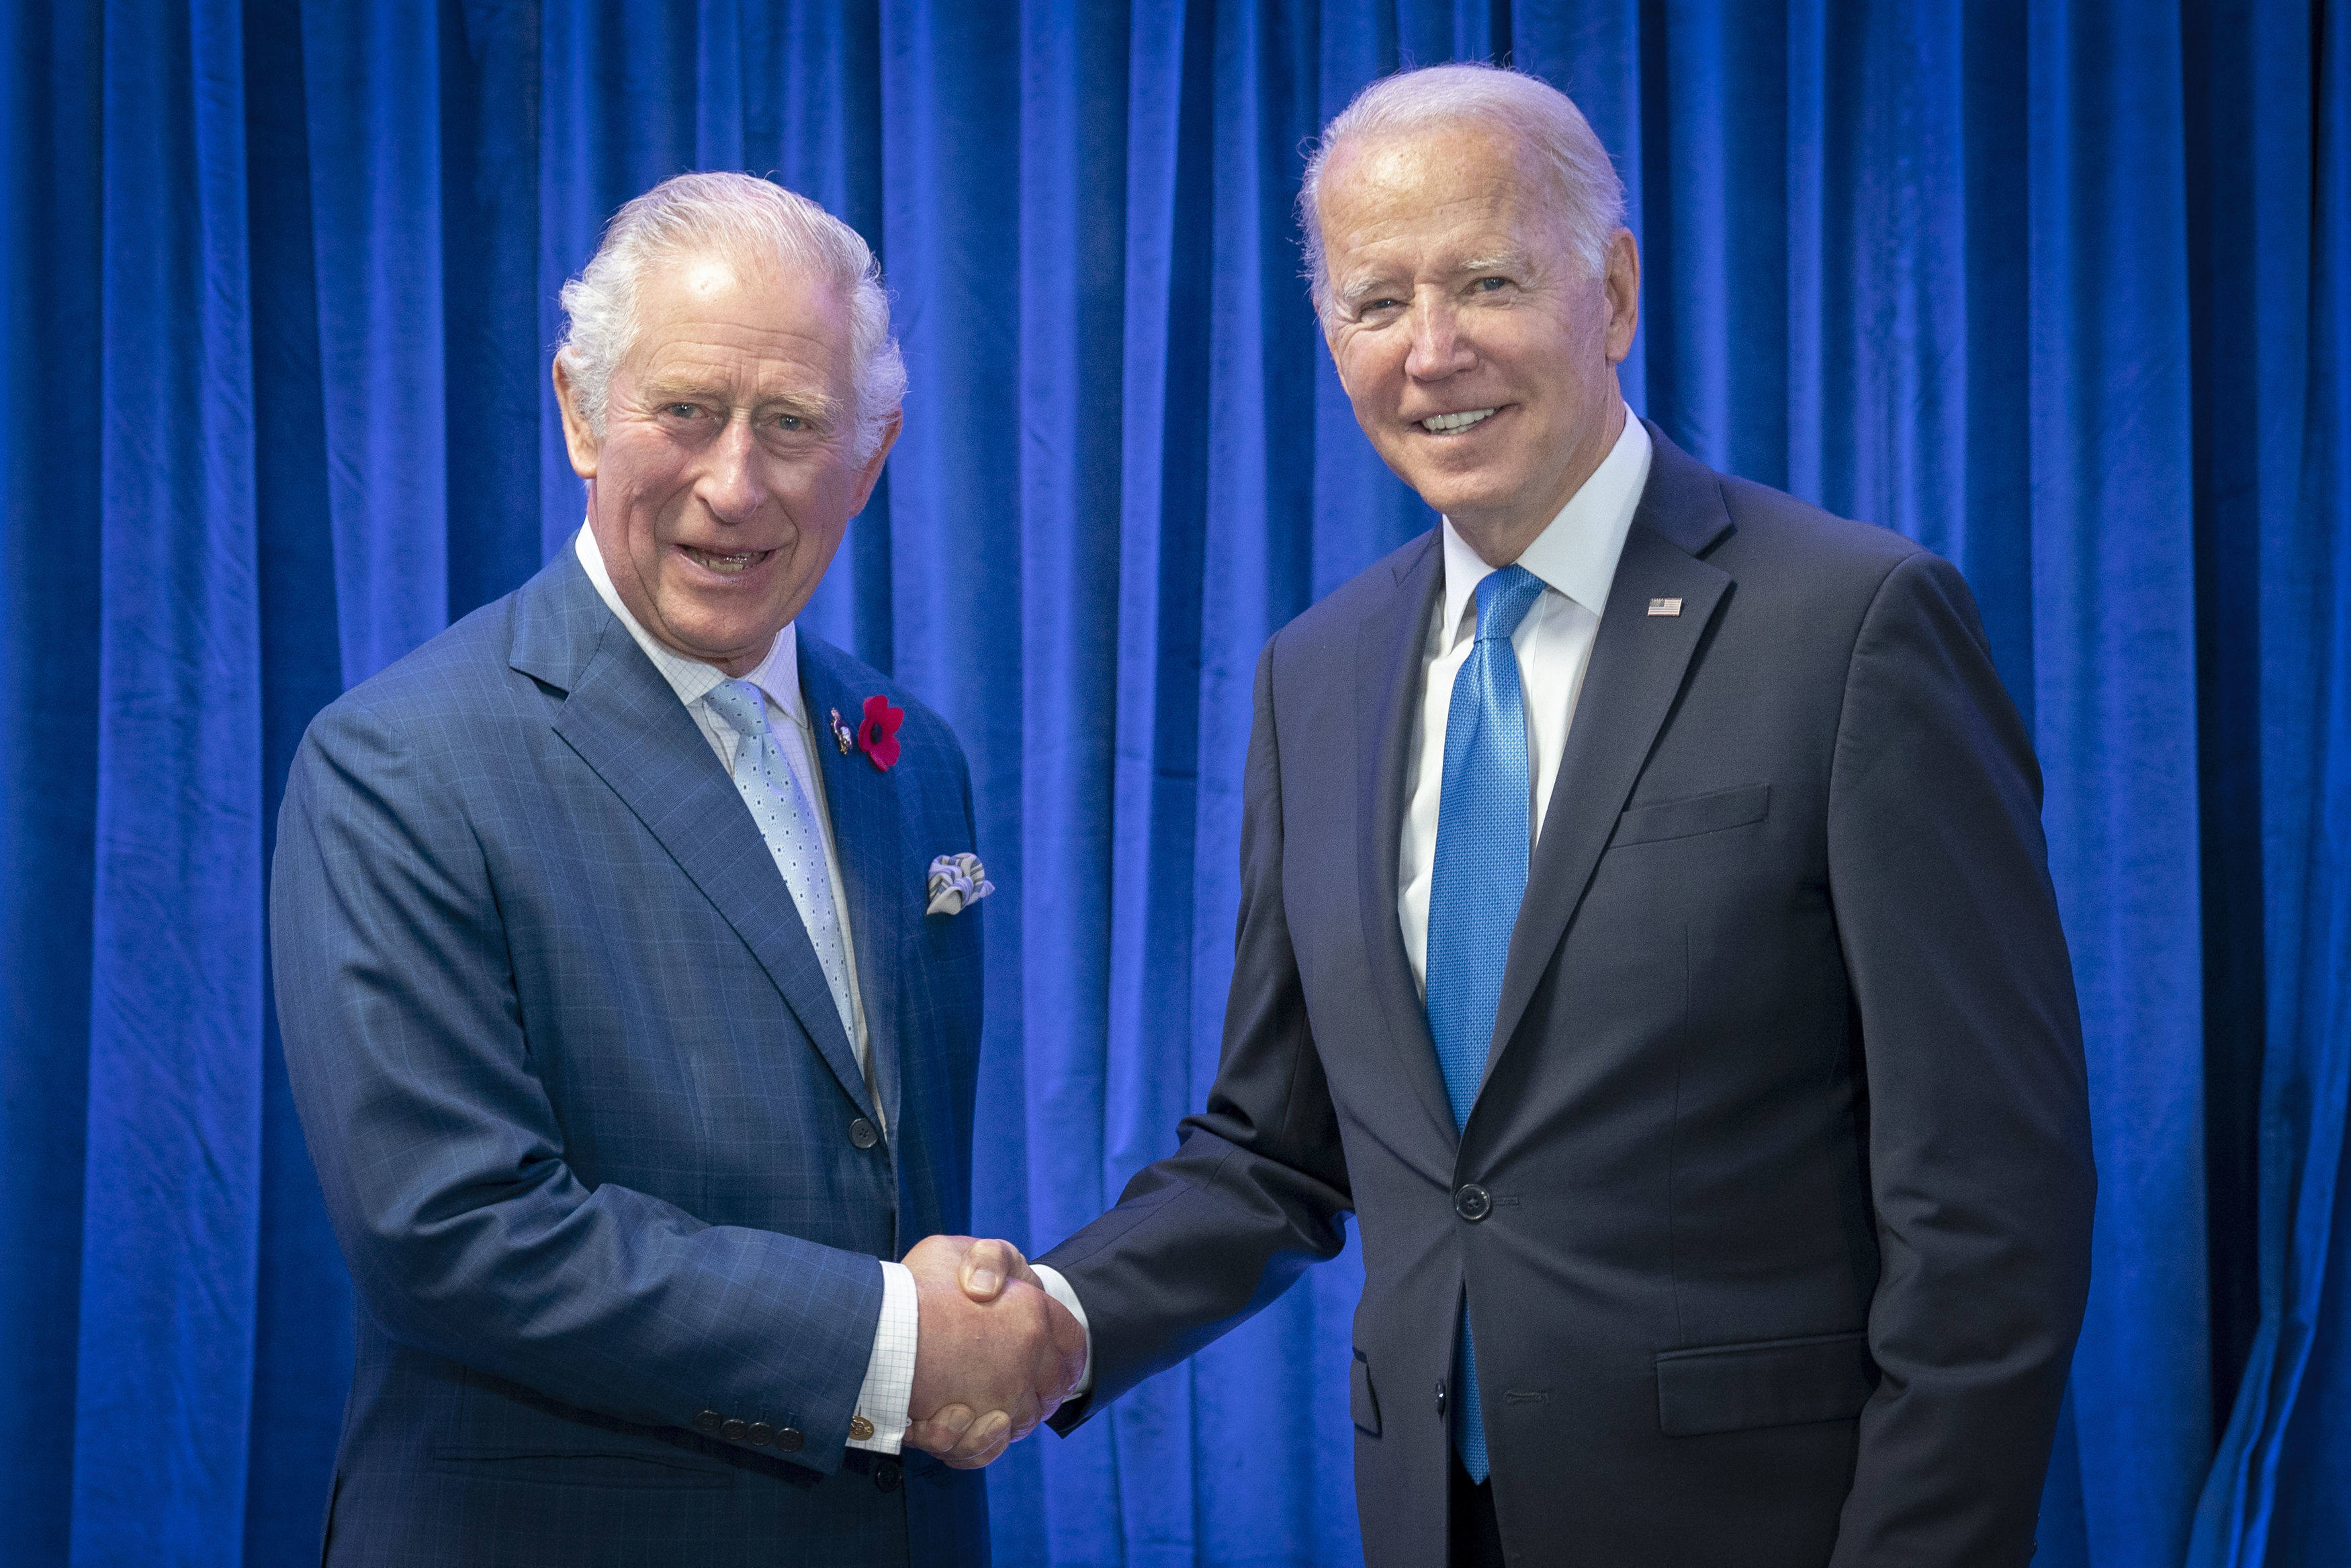 Britain’s King Charles, left, and US President Joe Biden at the Cop26 summit in Glasgow, Scotland in 2021. Biden will meet the king at Windsor Castle on July 10 as part of a European trip. Photo: Pool Photo via AP